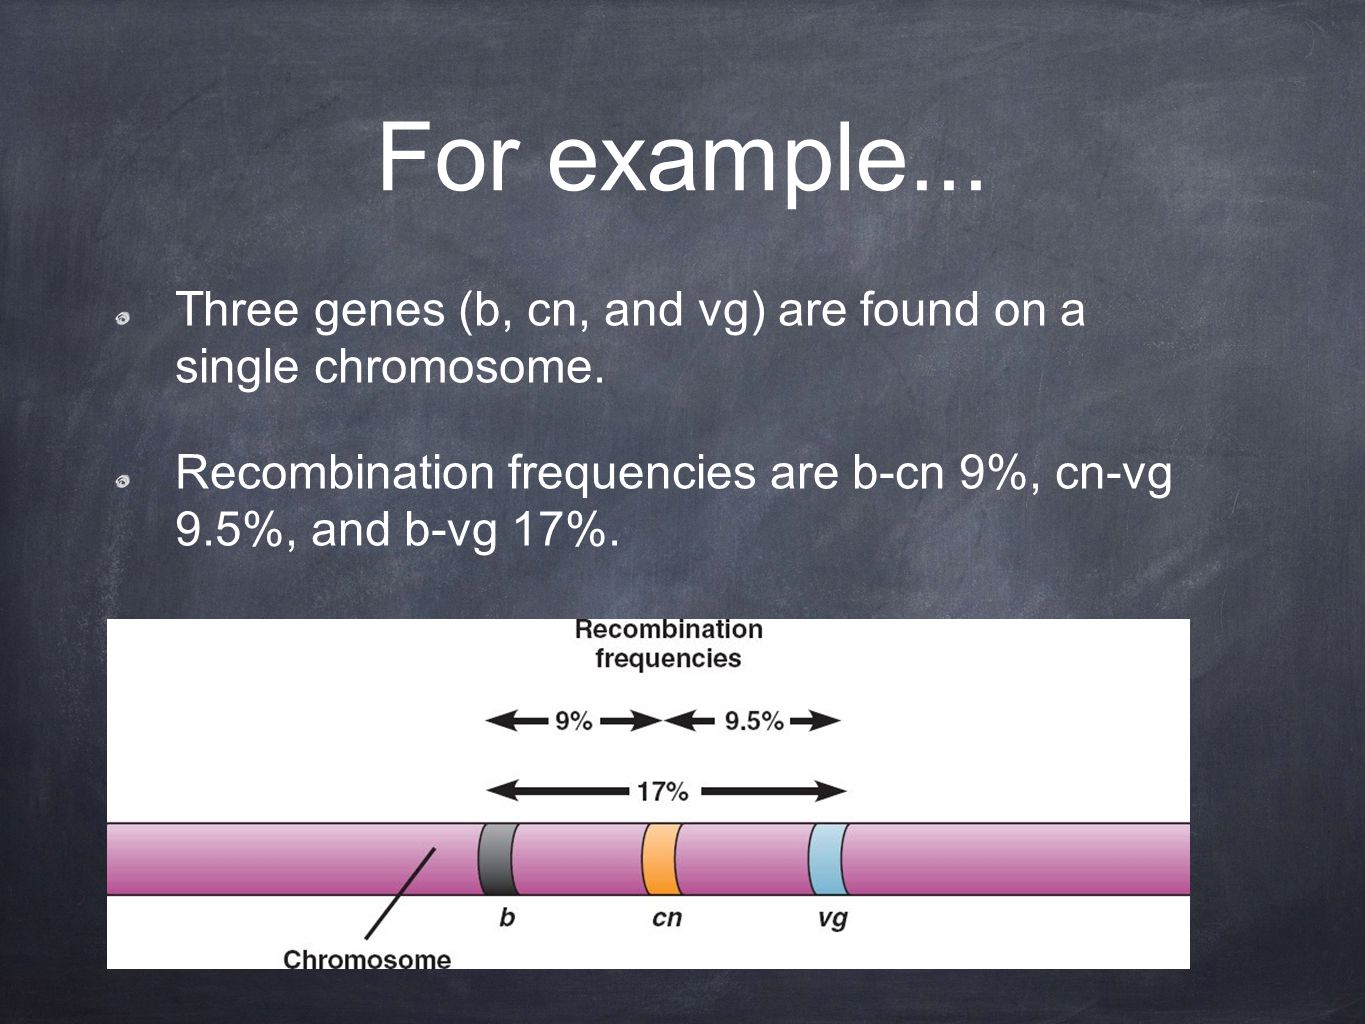 For example... Three genes (b, cn, and vg) are found on a single chromosome.